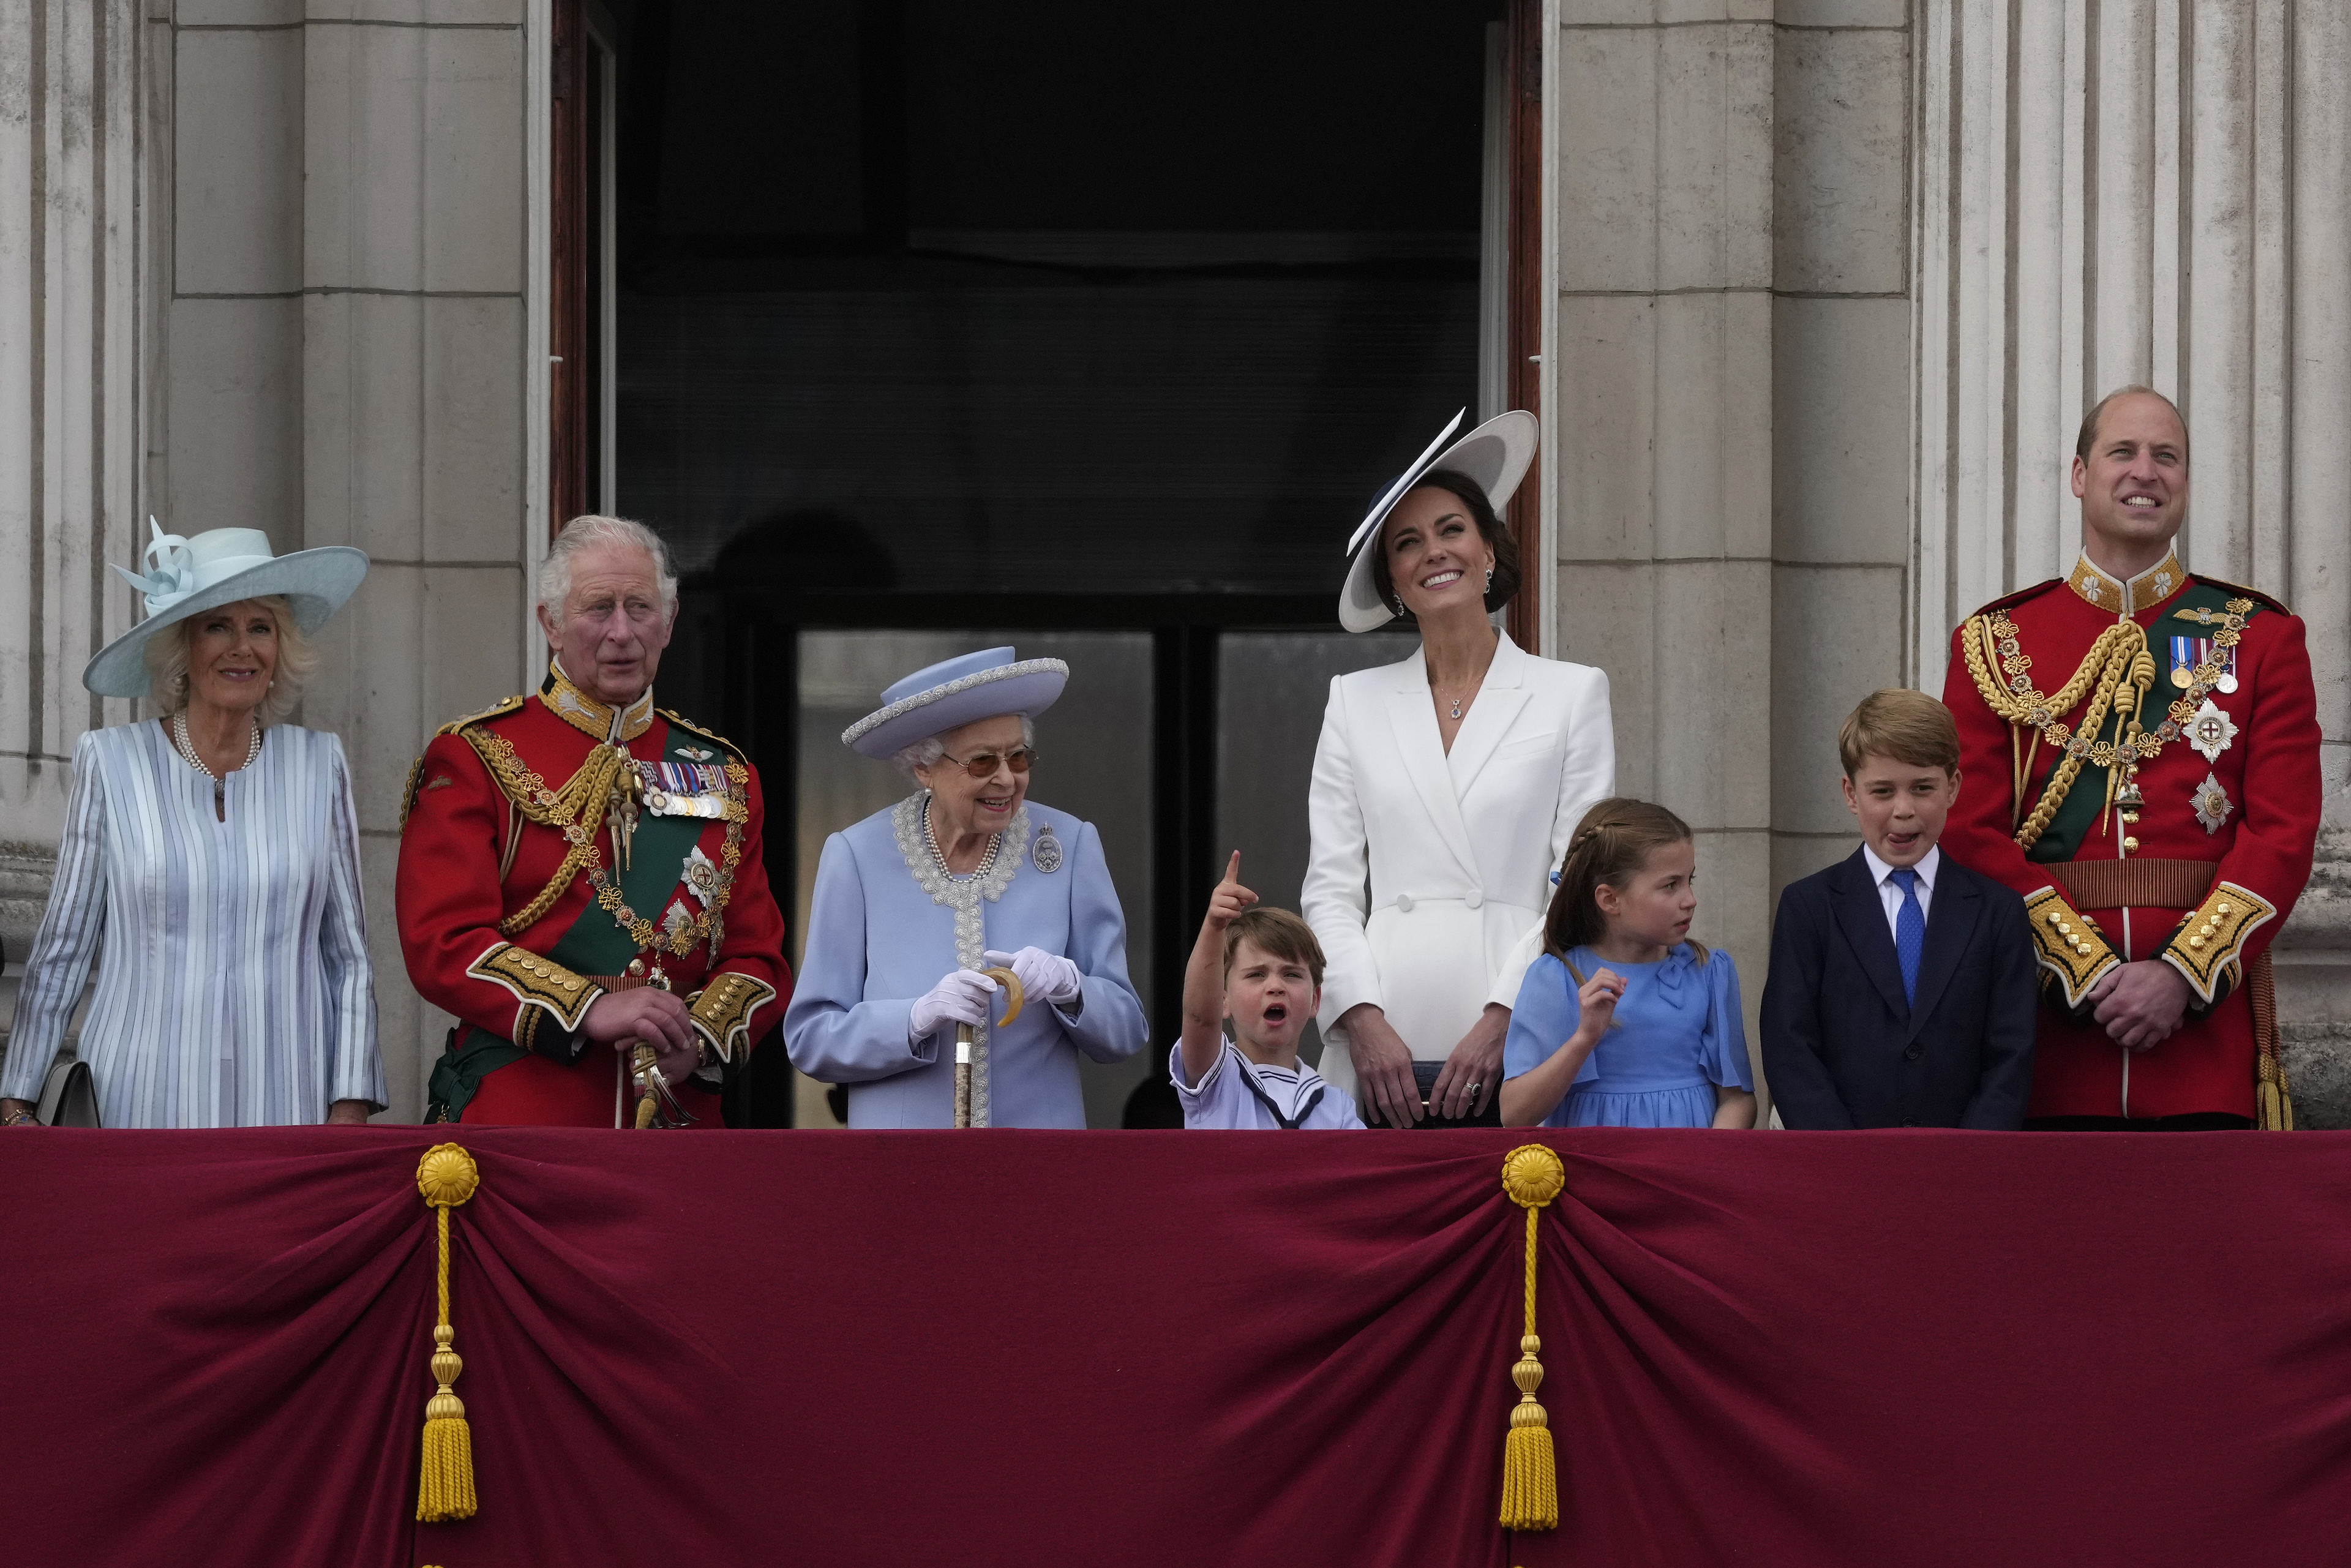 British monarchy: An ailing Queen Elizabeth, an exiled prince and shrinking  realm